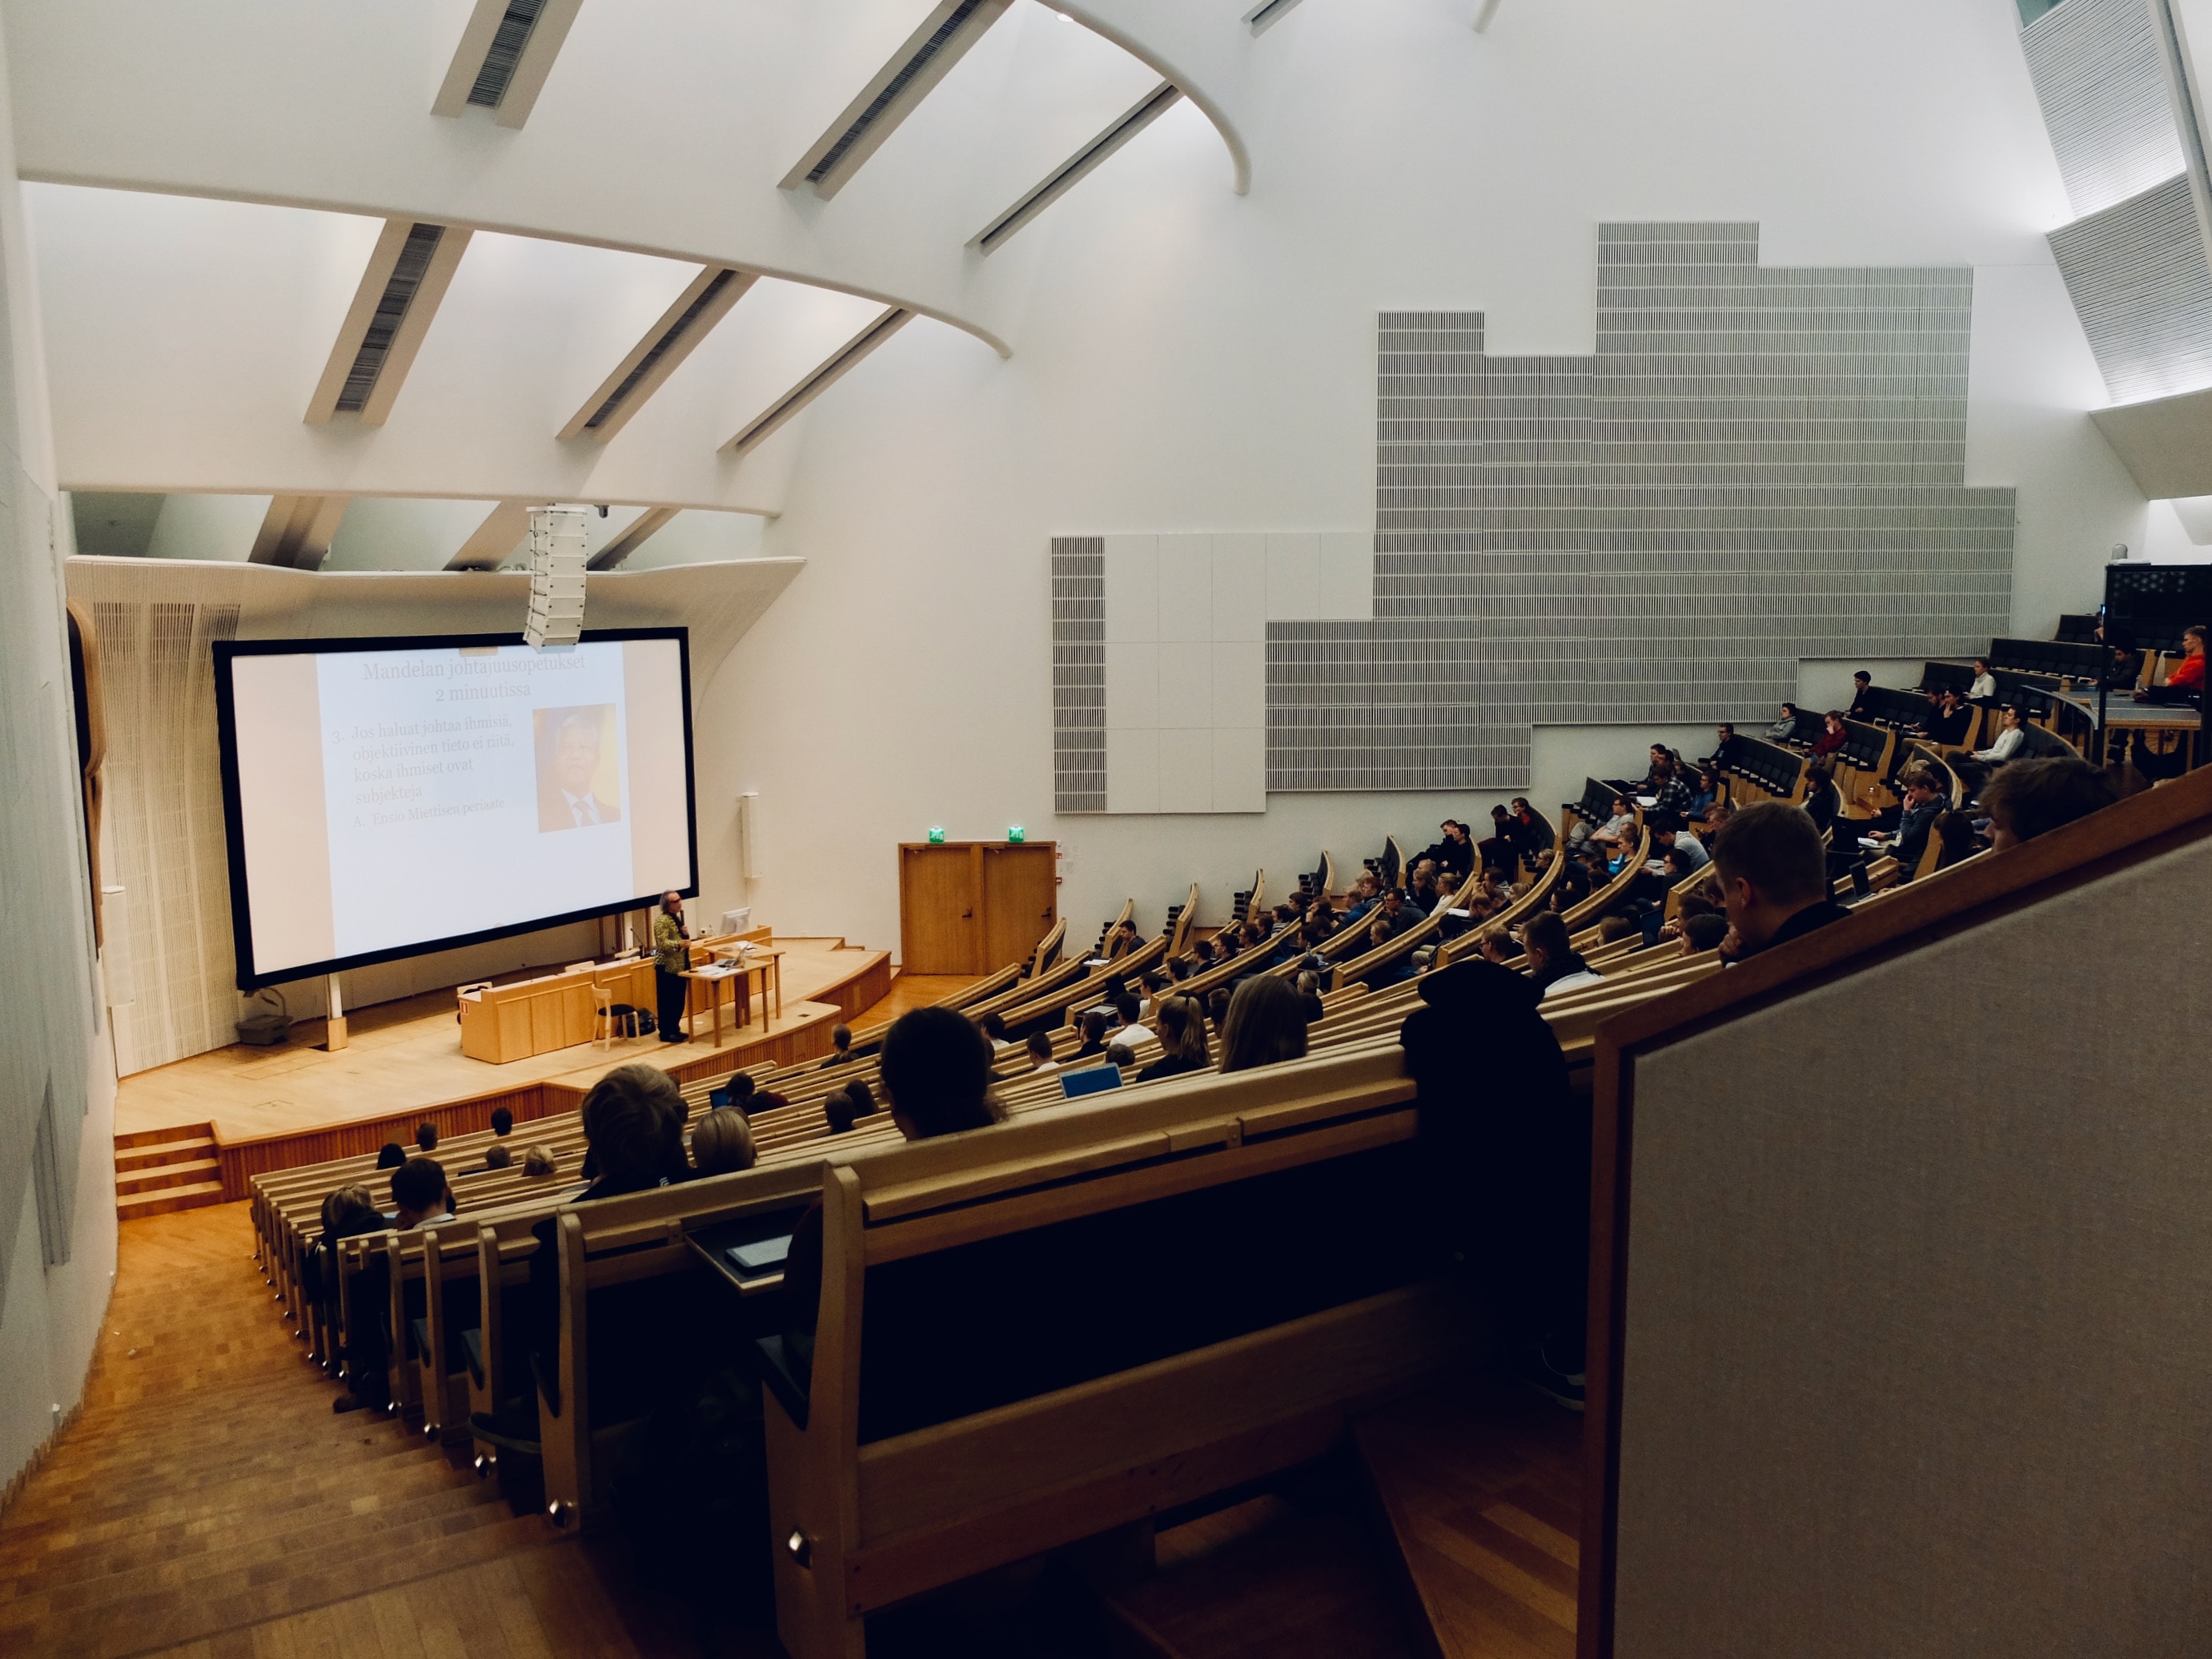 Photo of a lecture hall by Dom Fou on Unsplash